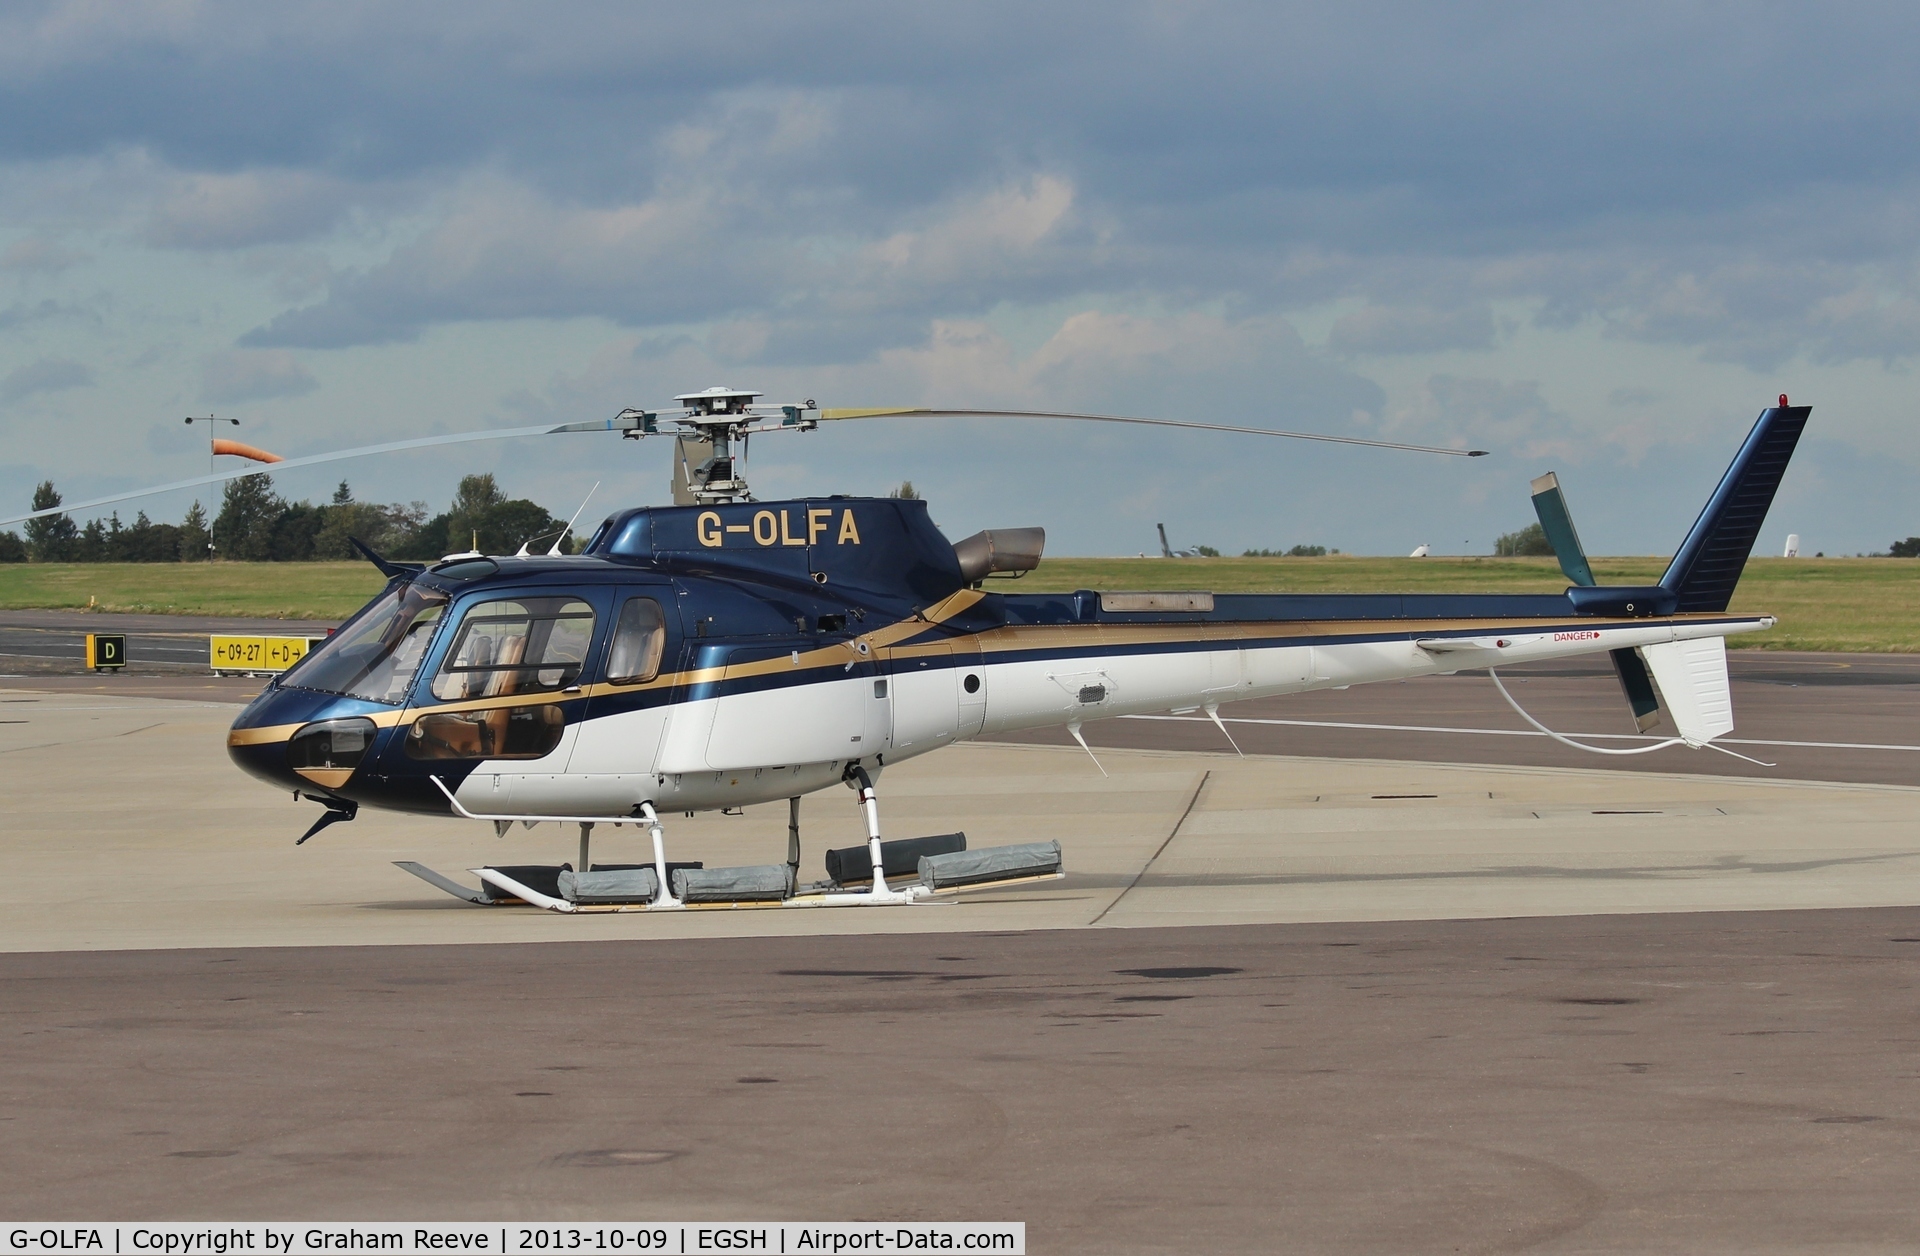 G-OLFA, 1998 Eurocopter AS-350B-3 Ecureuil Ecureuil C/N 3108, Parked at Norwich.